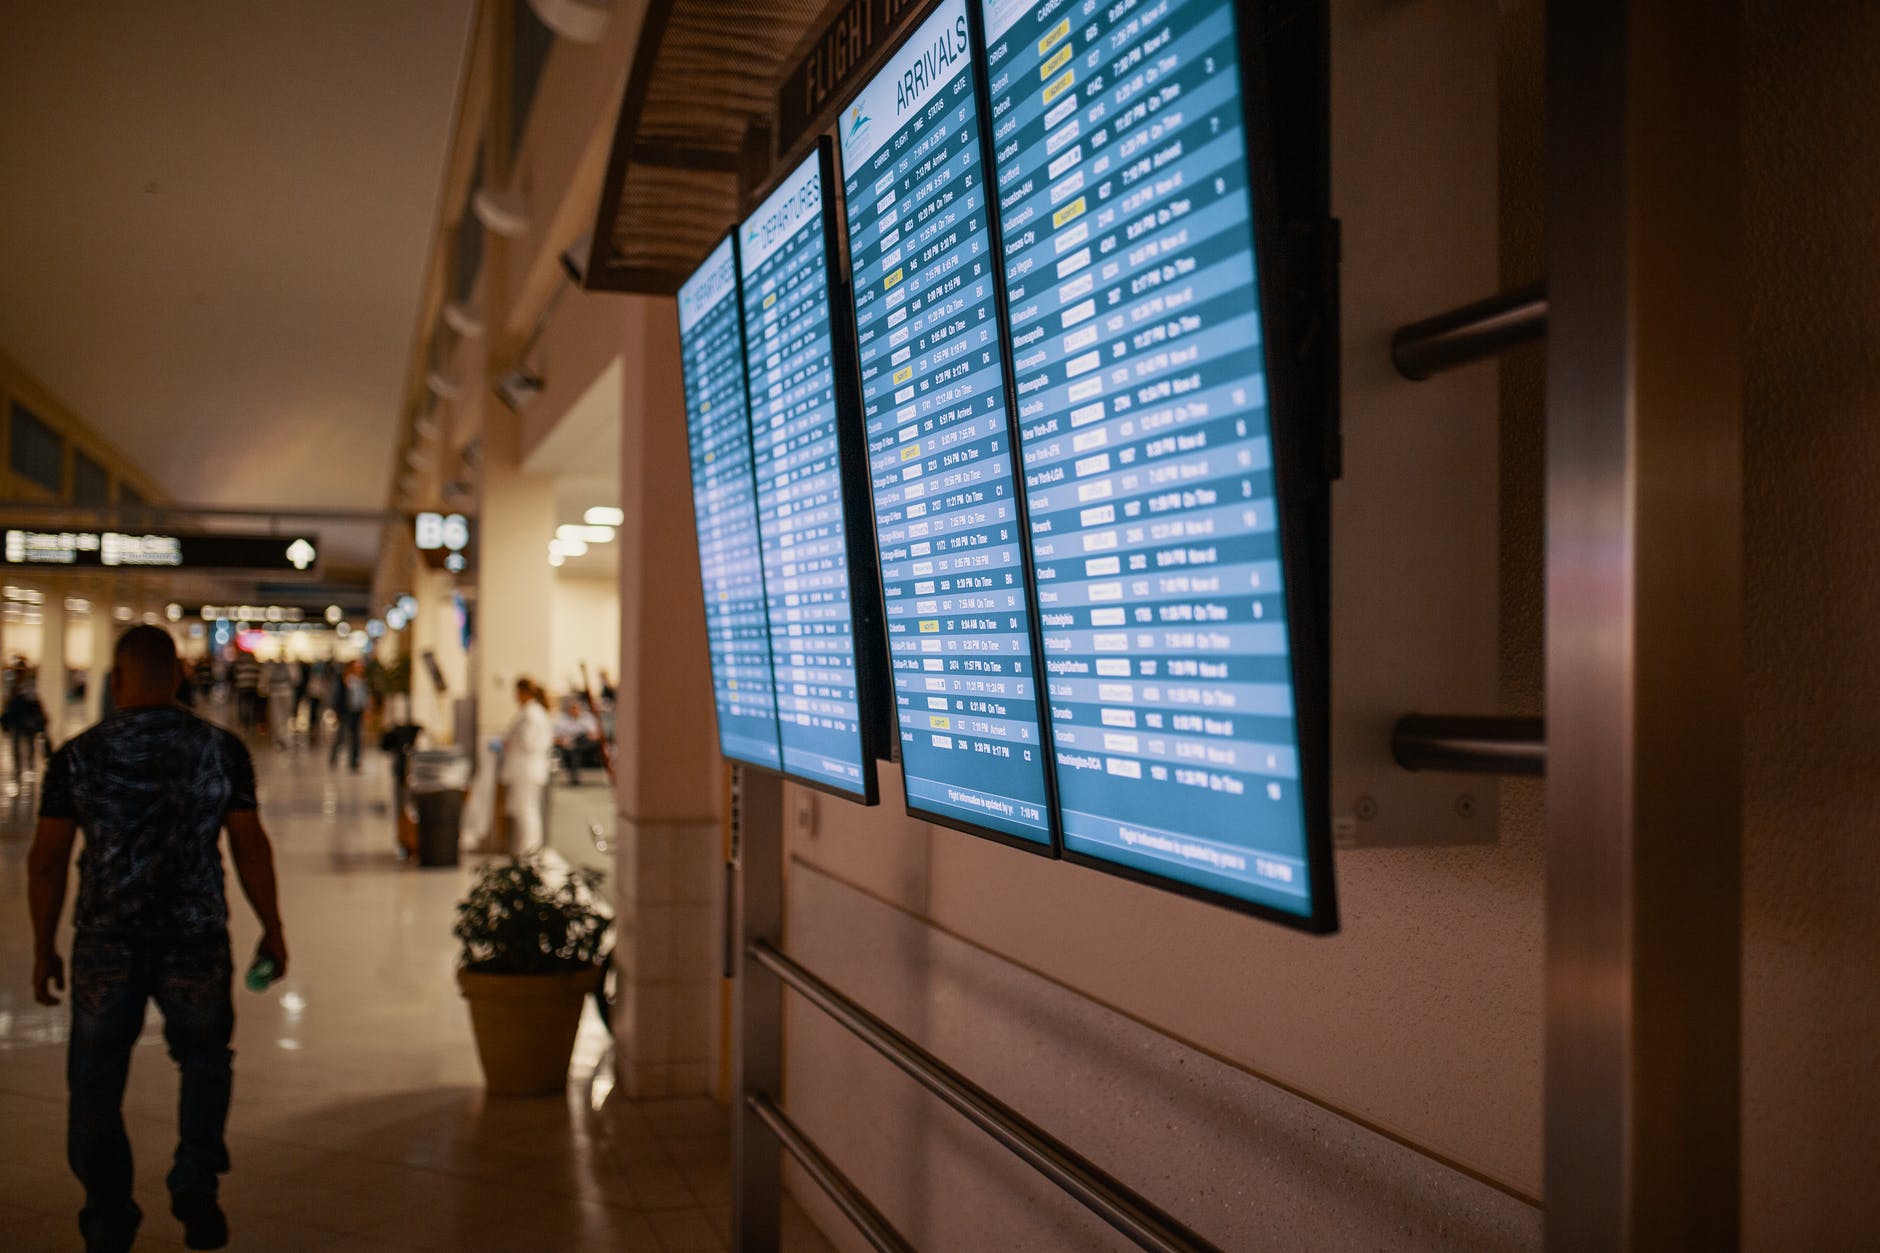 airline flight schedules on flat screen televisions